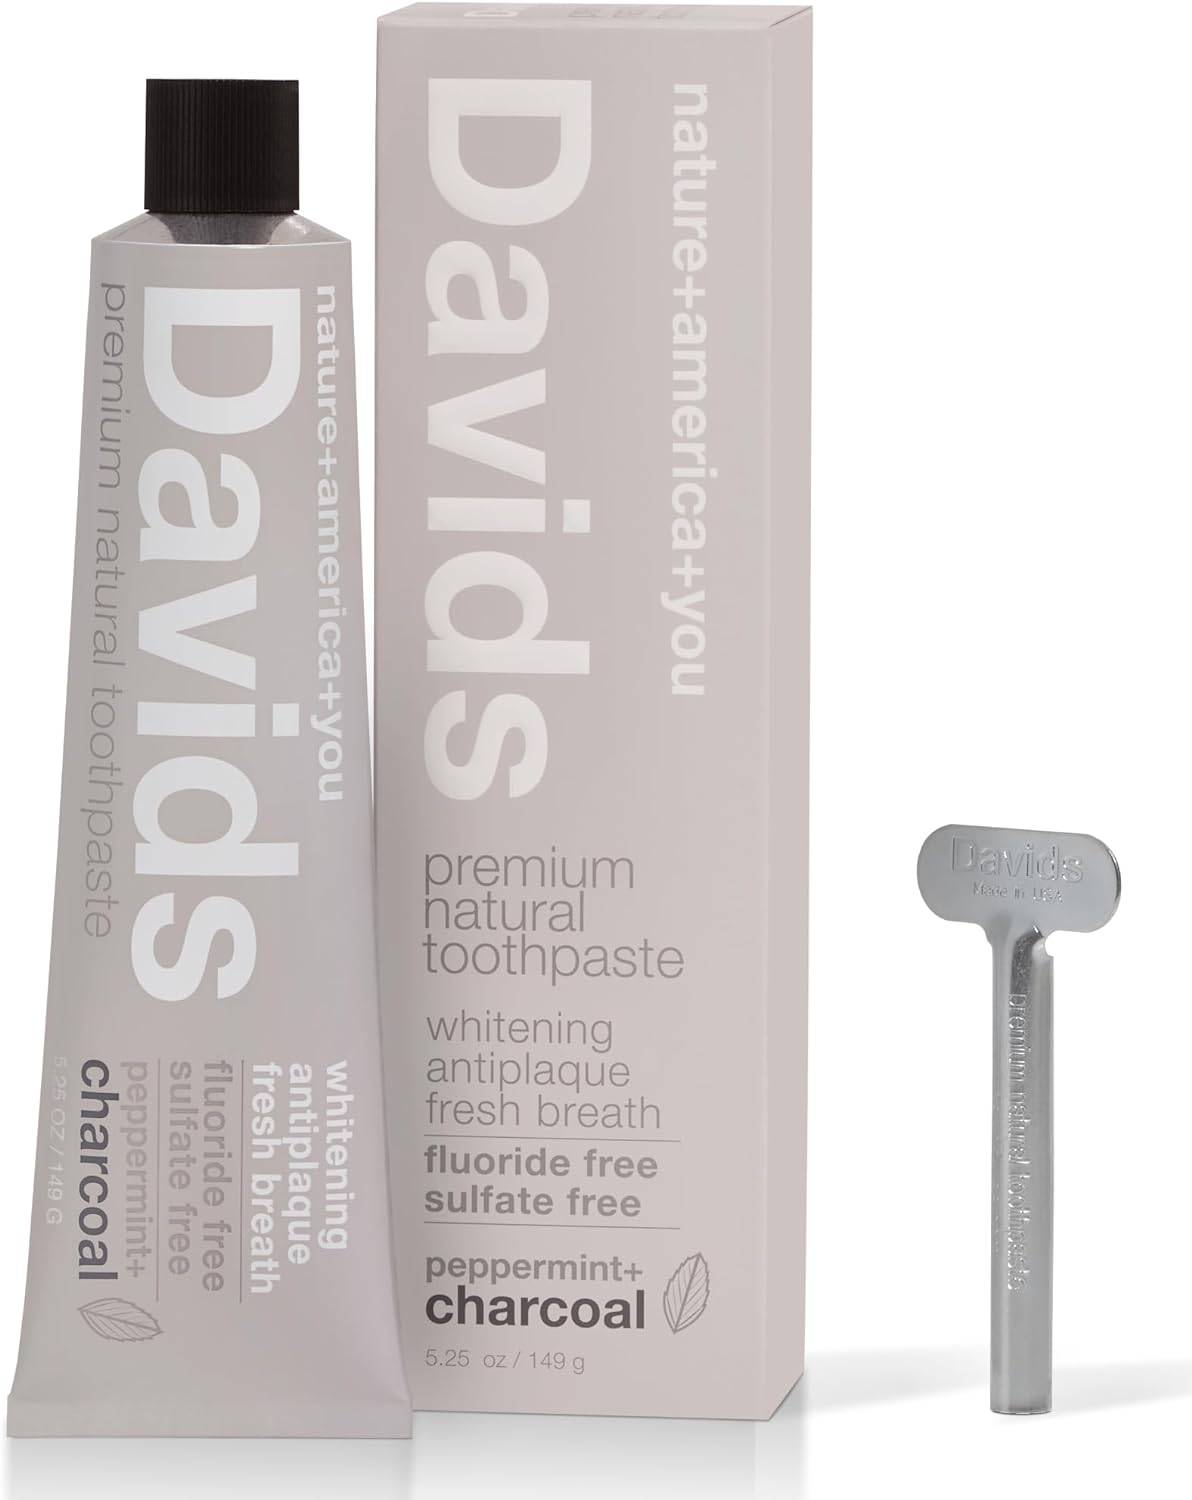 Davids Natural Charcoal Toothpaste for Enhanced Teeth Whitening, Peppermint, Antiplaque, Flouride Free, SLS Free, Enamel Safe, Toothpaste Squeezer Included, Recyclable Metal Tube, 5.25oz